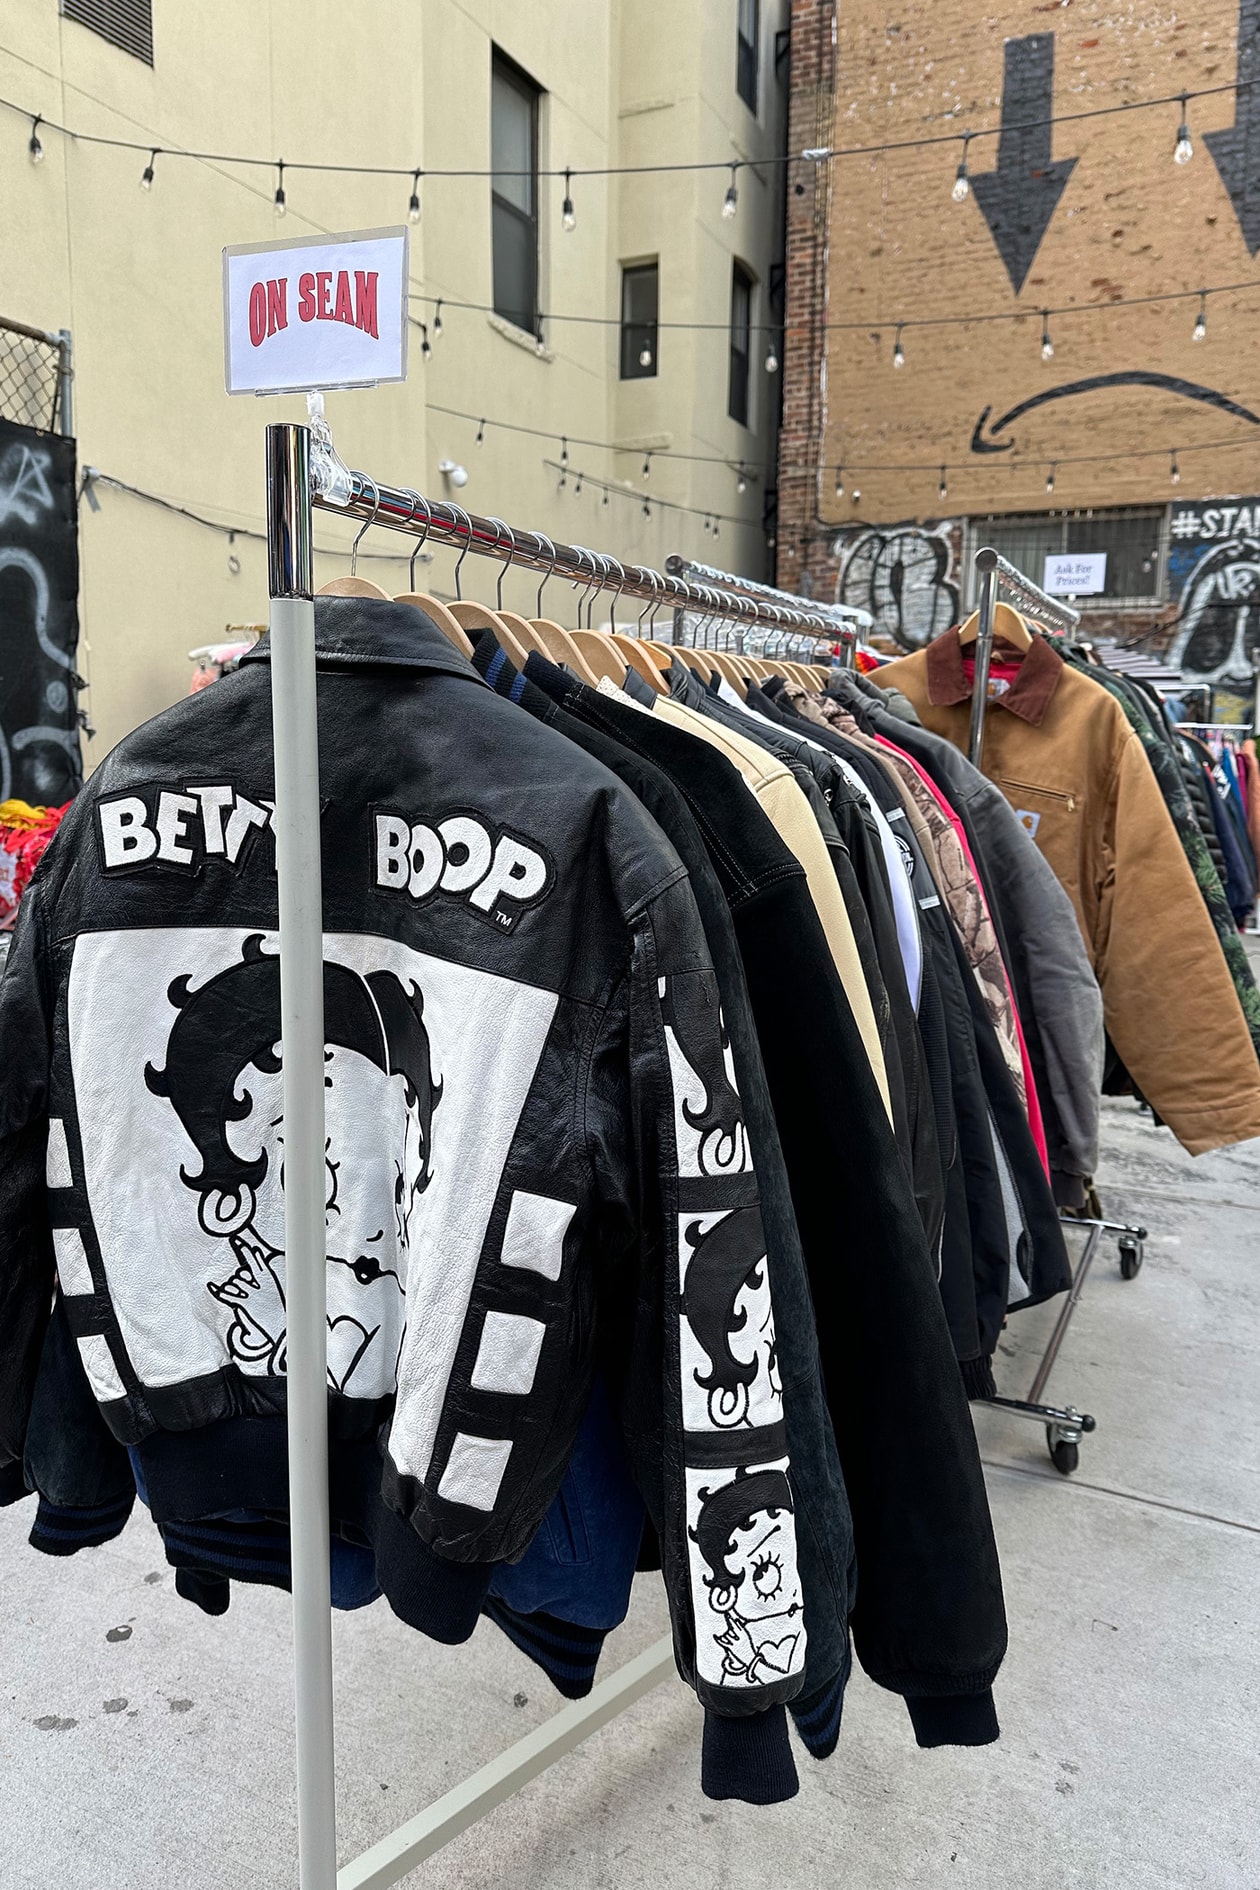 JuzsportsShops FLEA Powered by Depop Uplifts Local Independent Brands, Vendors, and Creatives